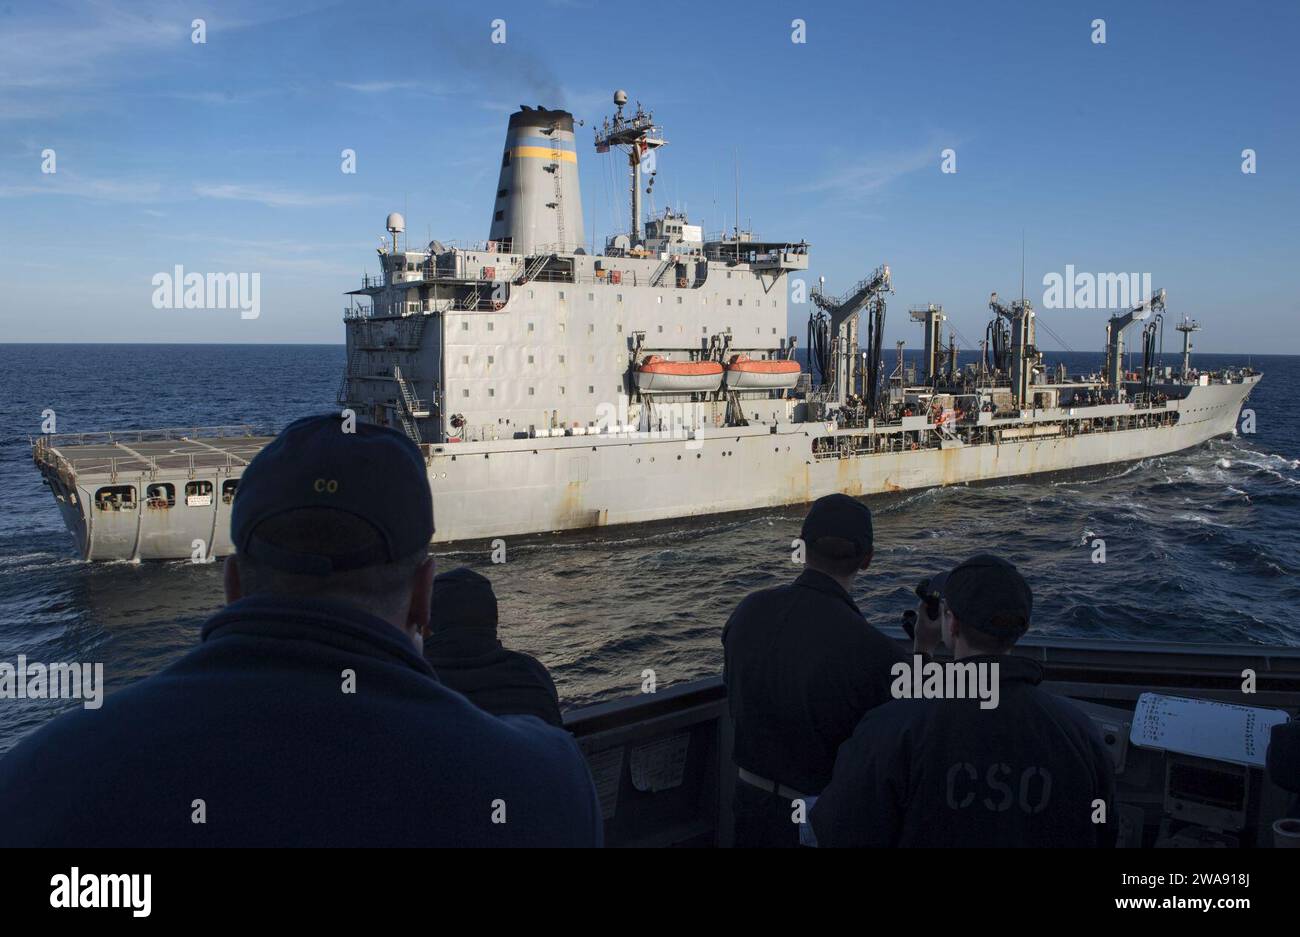 US military forces. 180301RG482-145  MEDITERRANEAN SEA (March 1, 2018) Cmdr. Bryan S. Gallo, far left, commanding officer of the Arleigh Burke-class, guided-missile destroyer USS Ross (DDG 71), watches as Ross comes alongside the Henry J. Kaiser-class underway replenishment oiler USNS Patuxent (T-AO-201) during a replenishment at sea March 1, 2018. Ross, forward-deployed to Rota, Spain, is on its sixth patrol in the U.S. 6th Fleet area of operations in support of regional allies and partners and U.S. national security interests in Europe. (U.S. Navy photo by Mass Communication Specialist 1st C Stock Photo